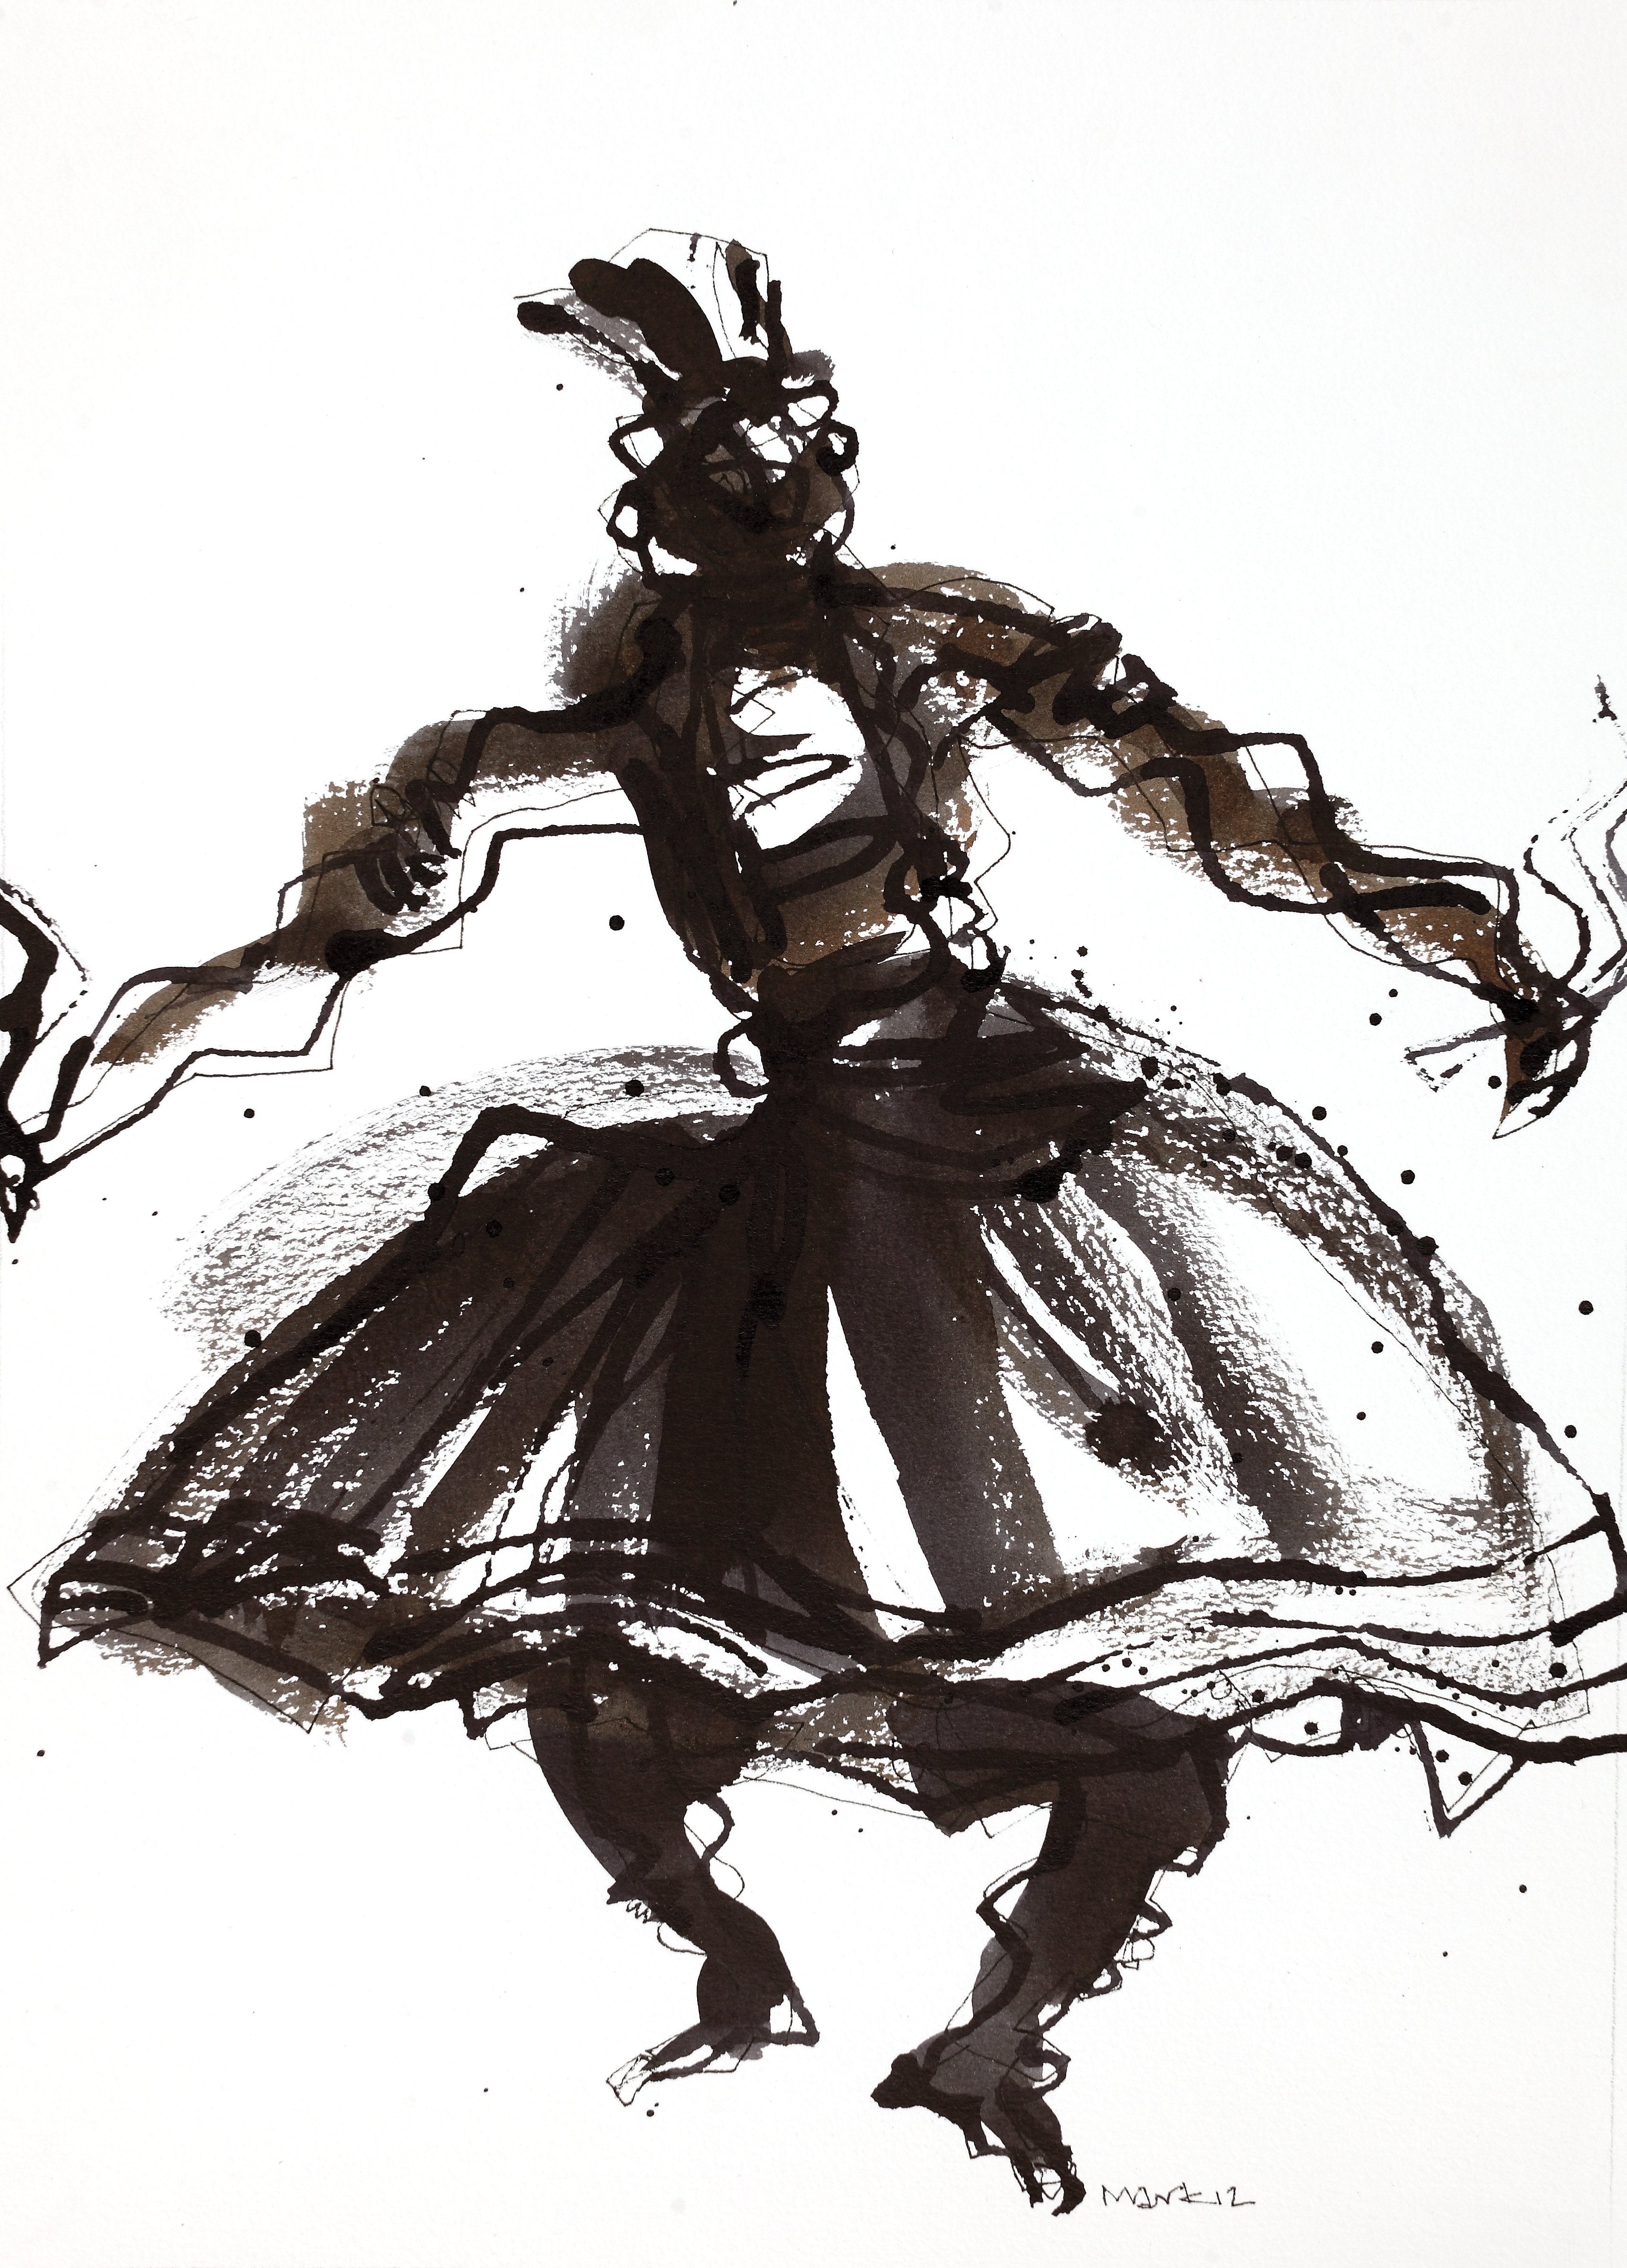 Performer 284|S. Mark Rathinaraj- Pen and Ink on Paper, , 11.5 x 8.25 inches